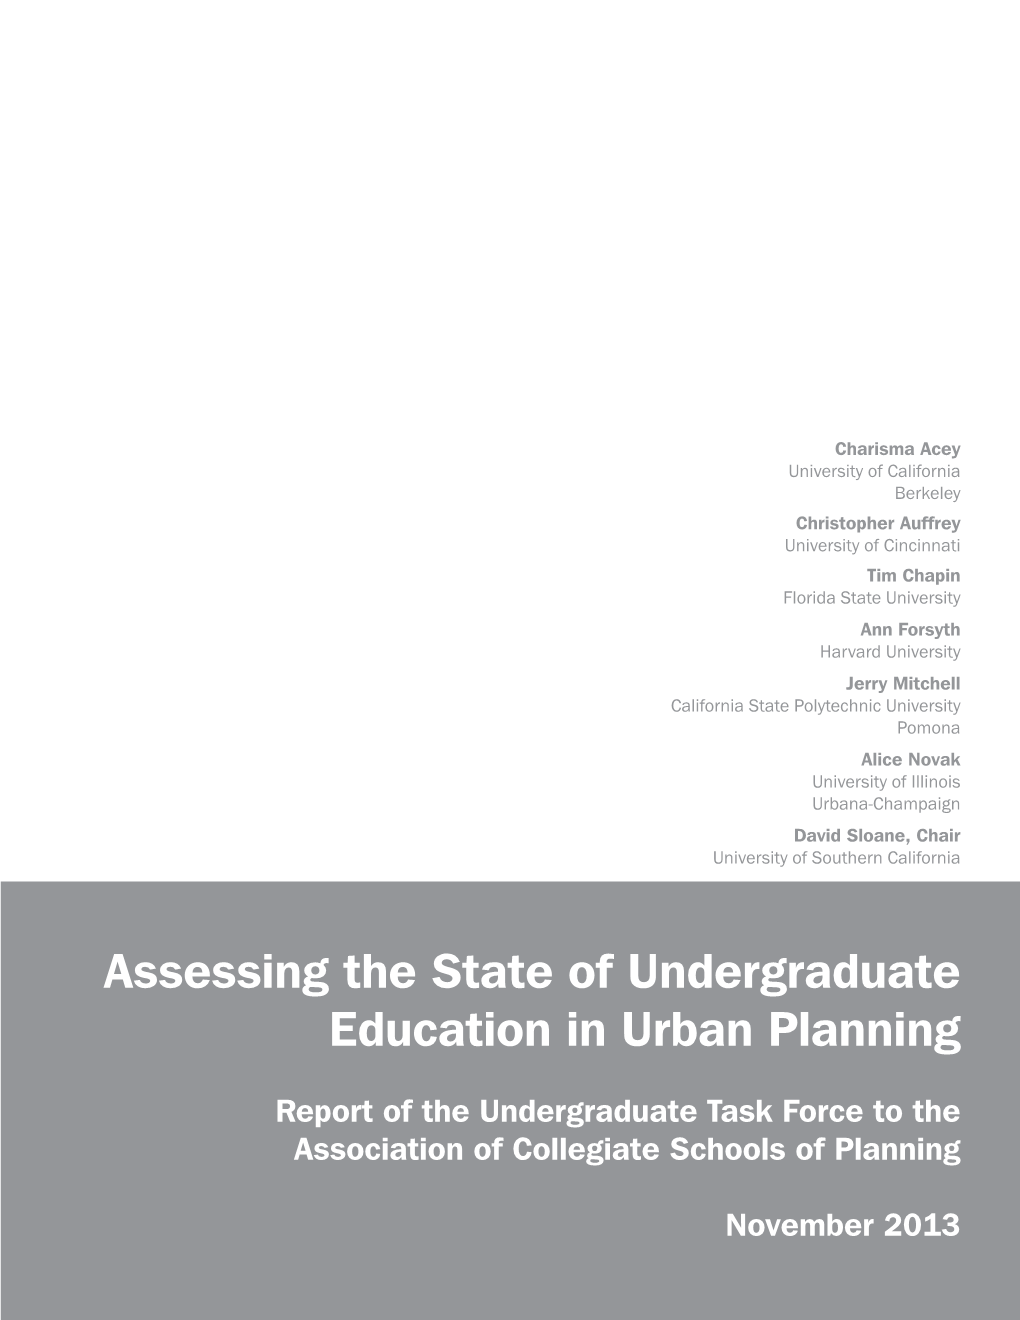 Assessing the State of Undergraduate Education in Urban Planning